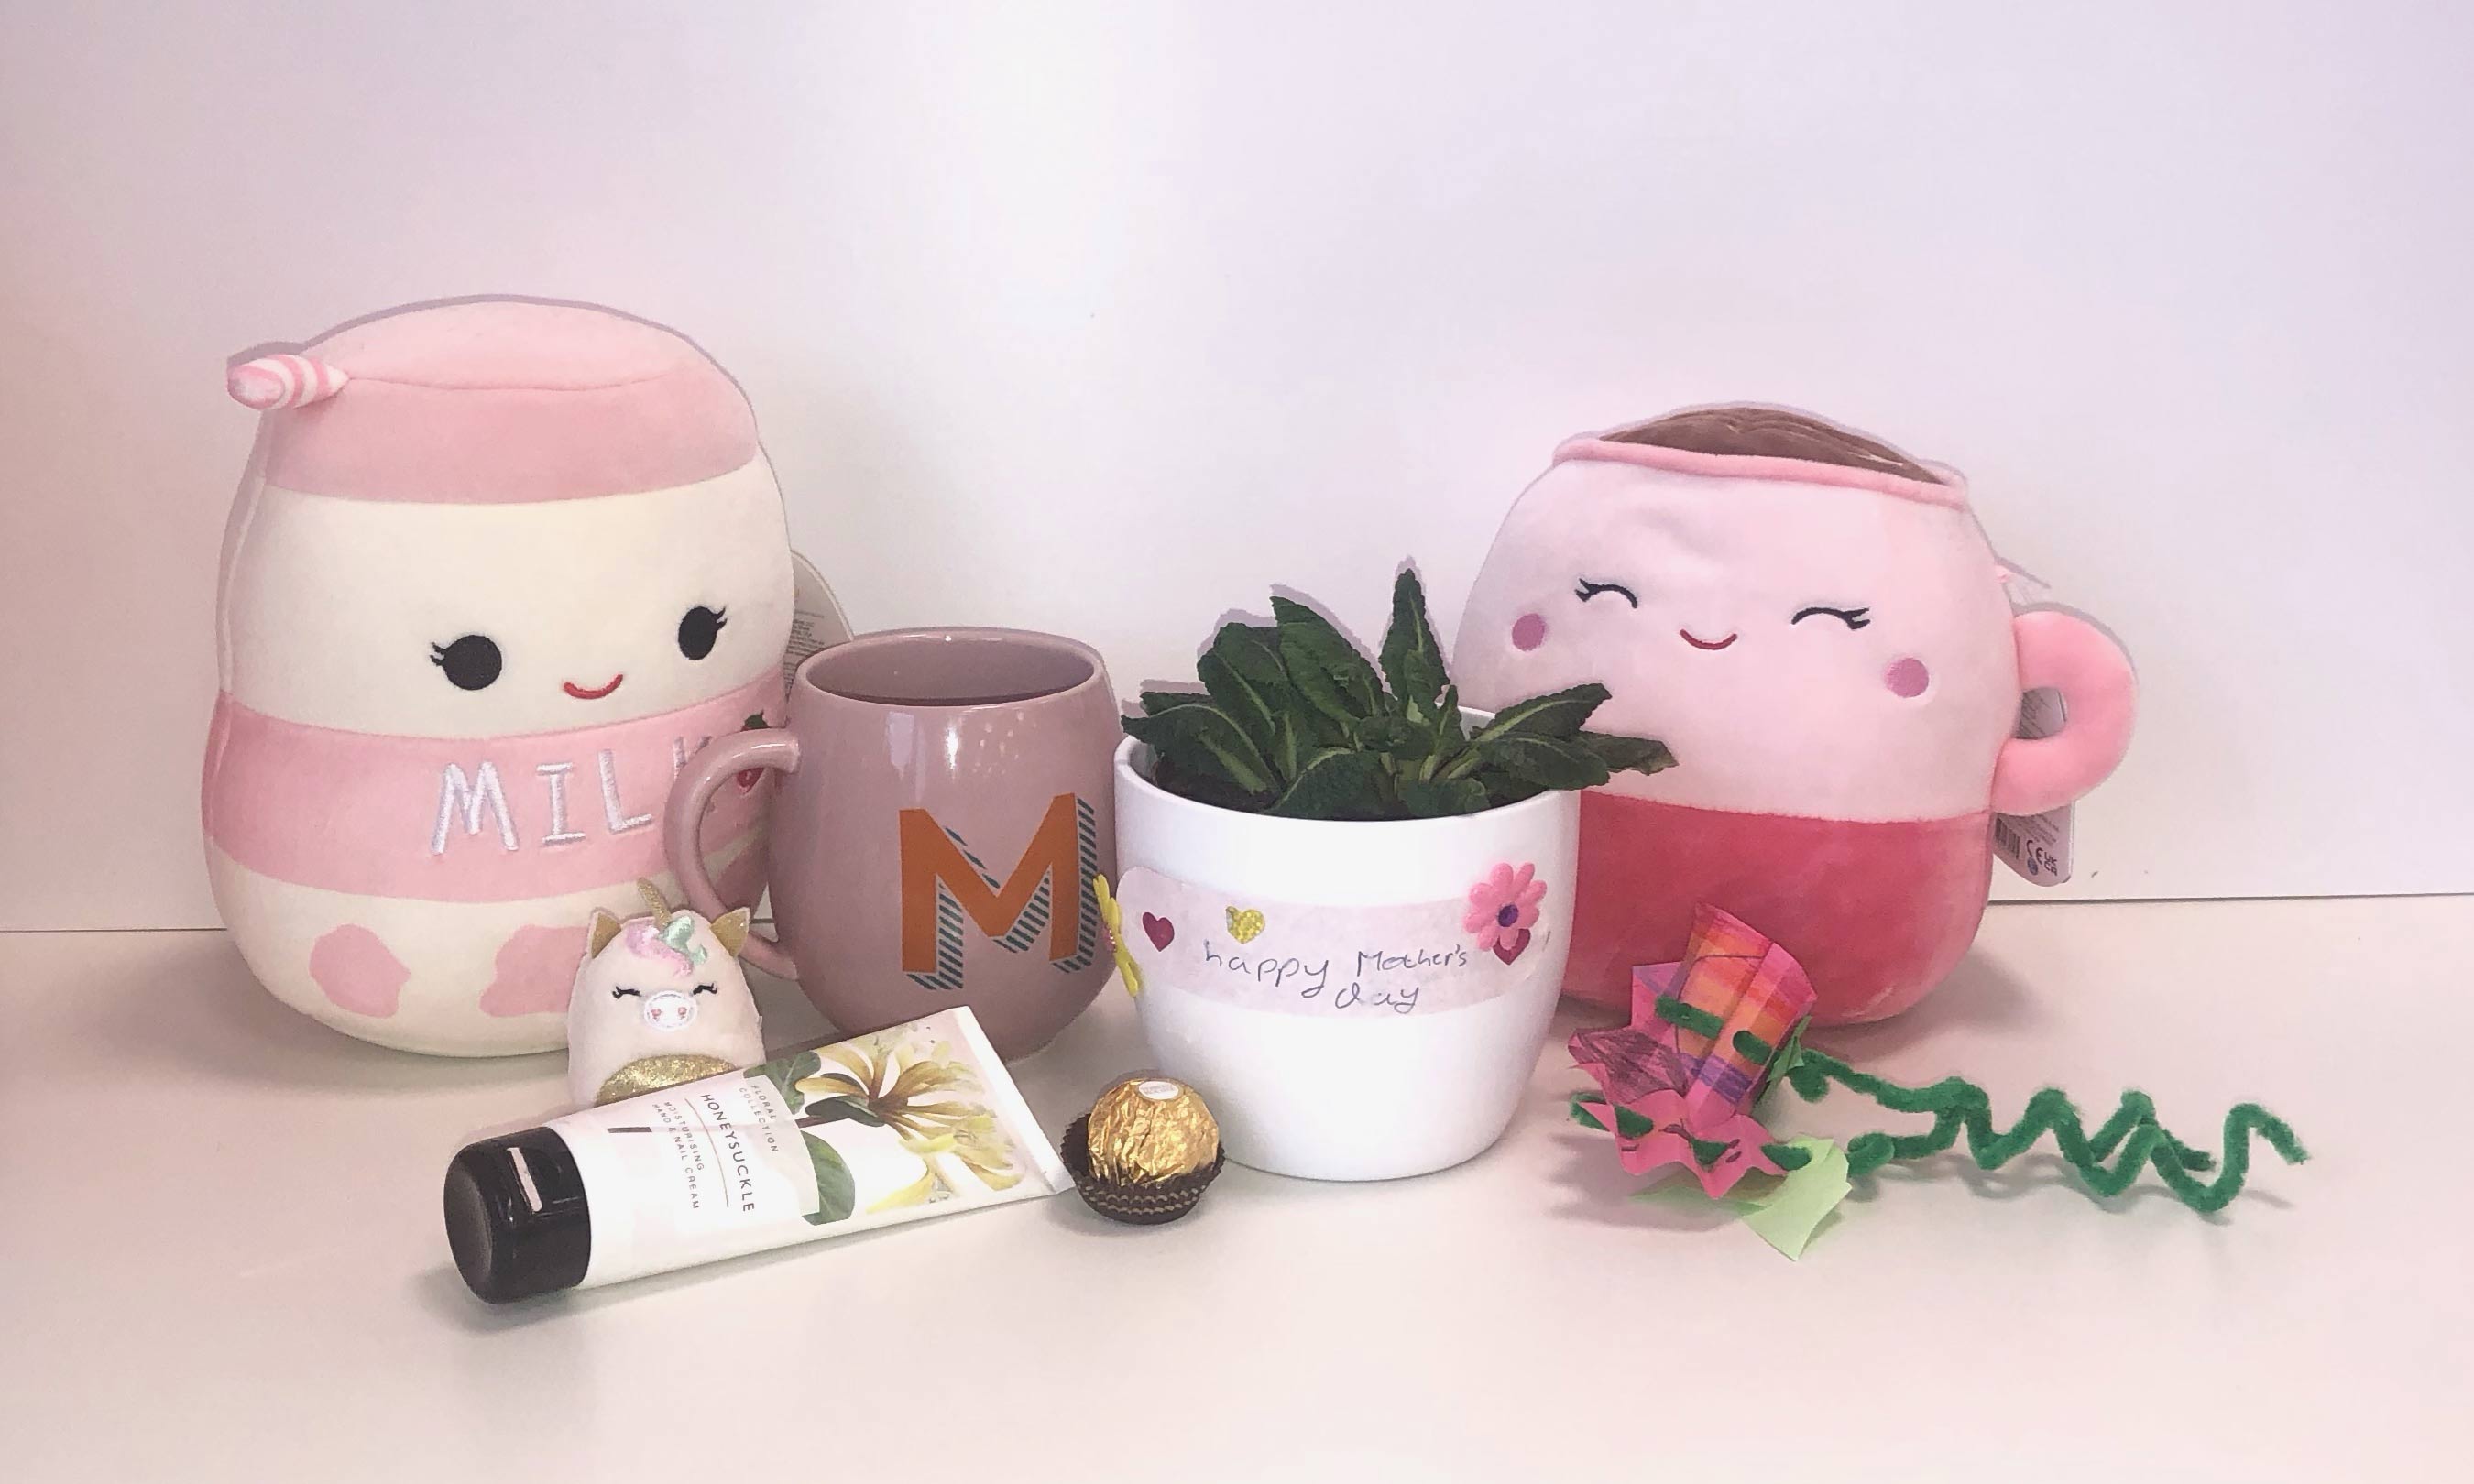 gifts for Mother's Day